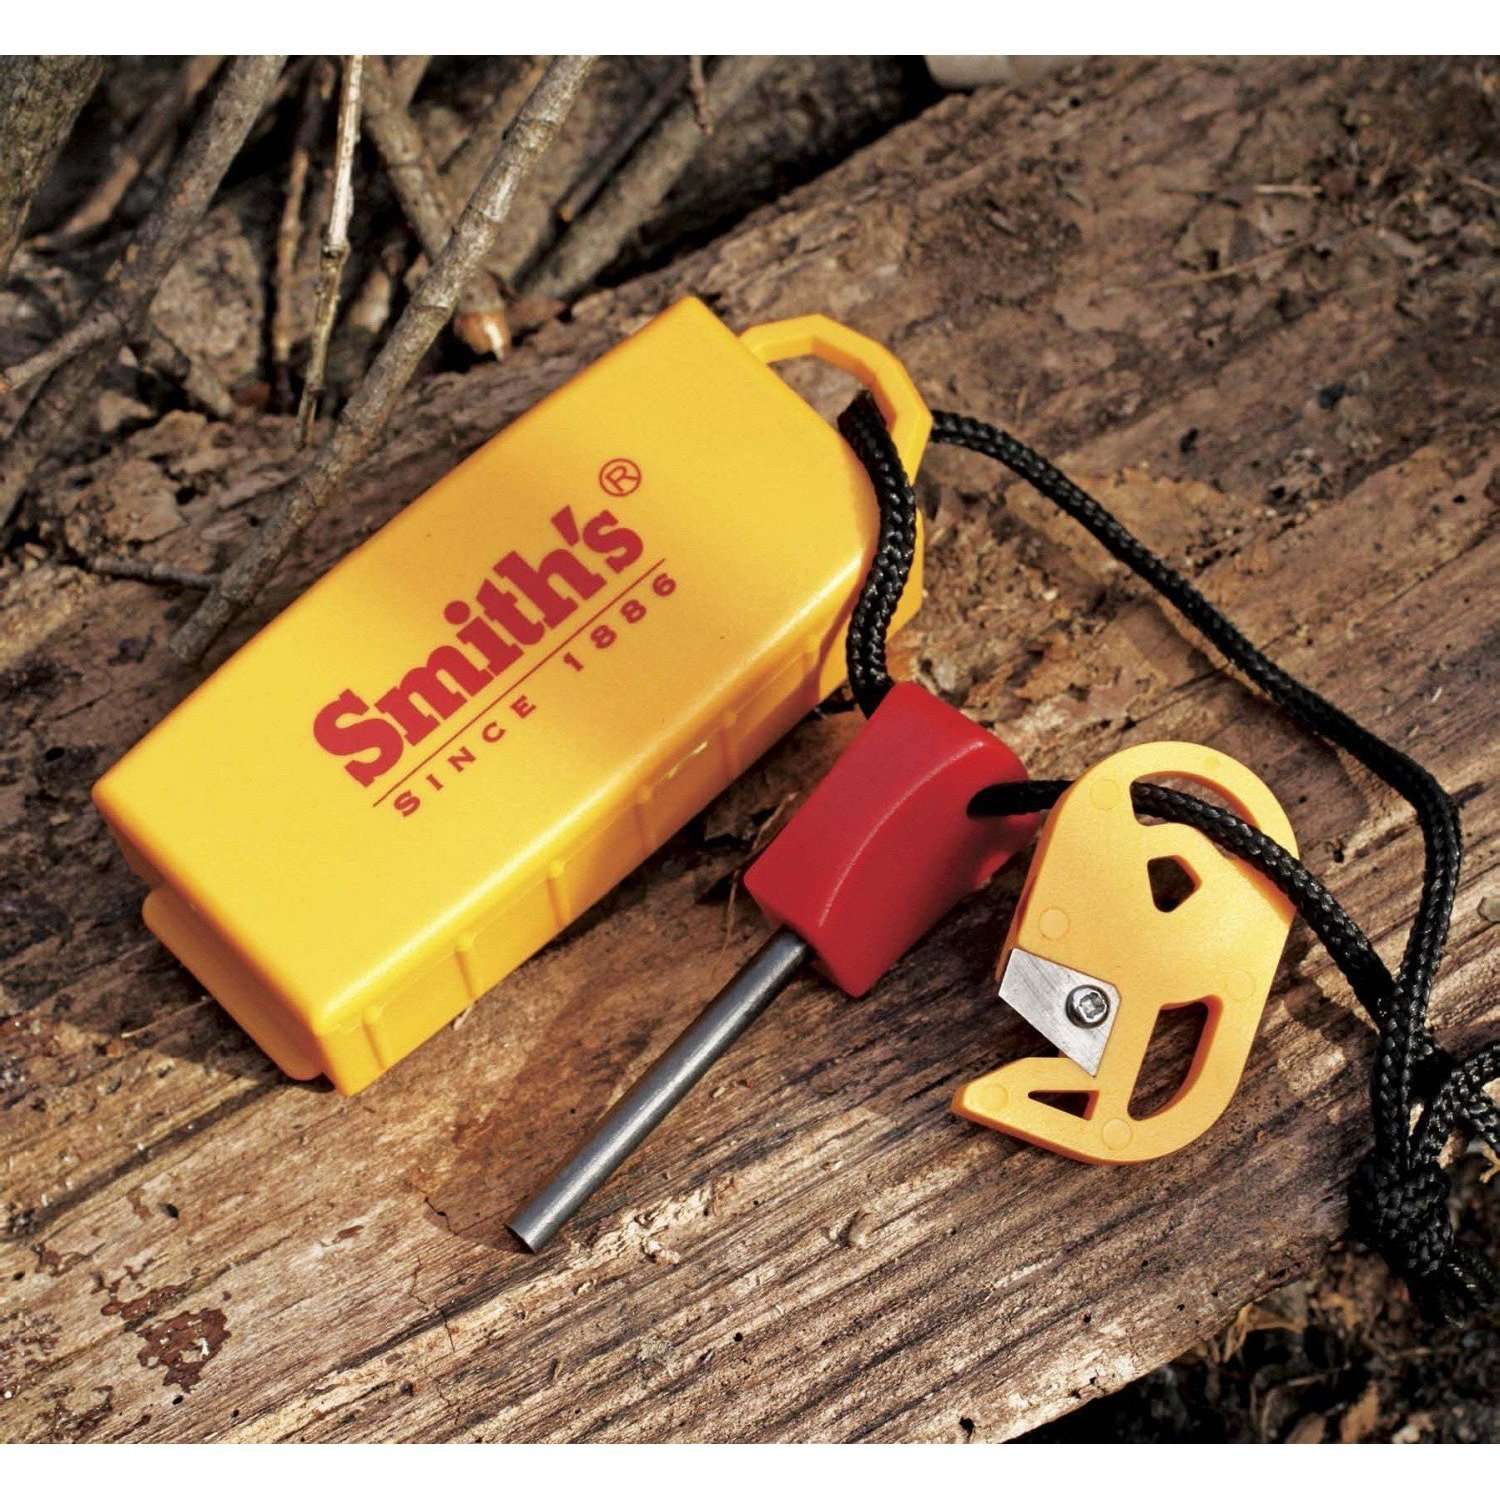 Smith's, Smith's Pack Pal Tinder Maker With Fire Starter, Ferro Rods, Wylies Outdoor World,